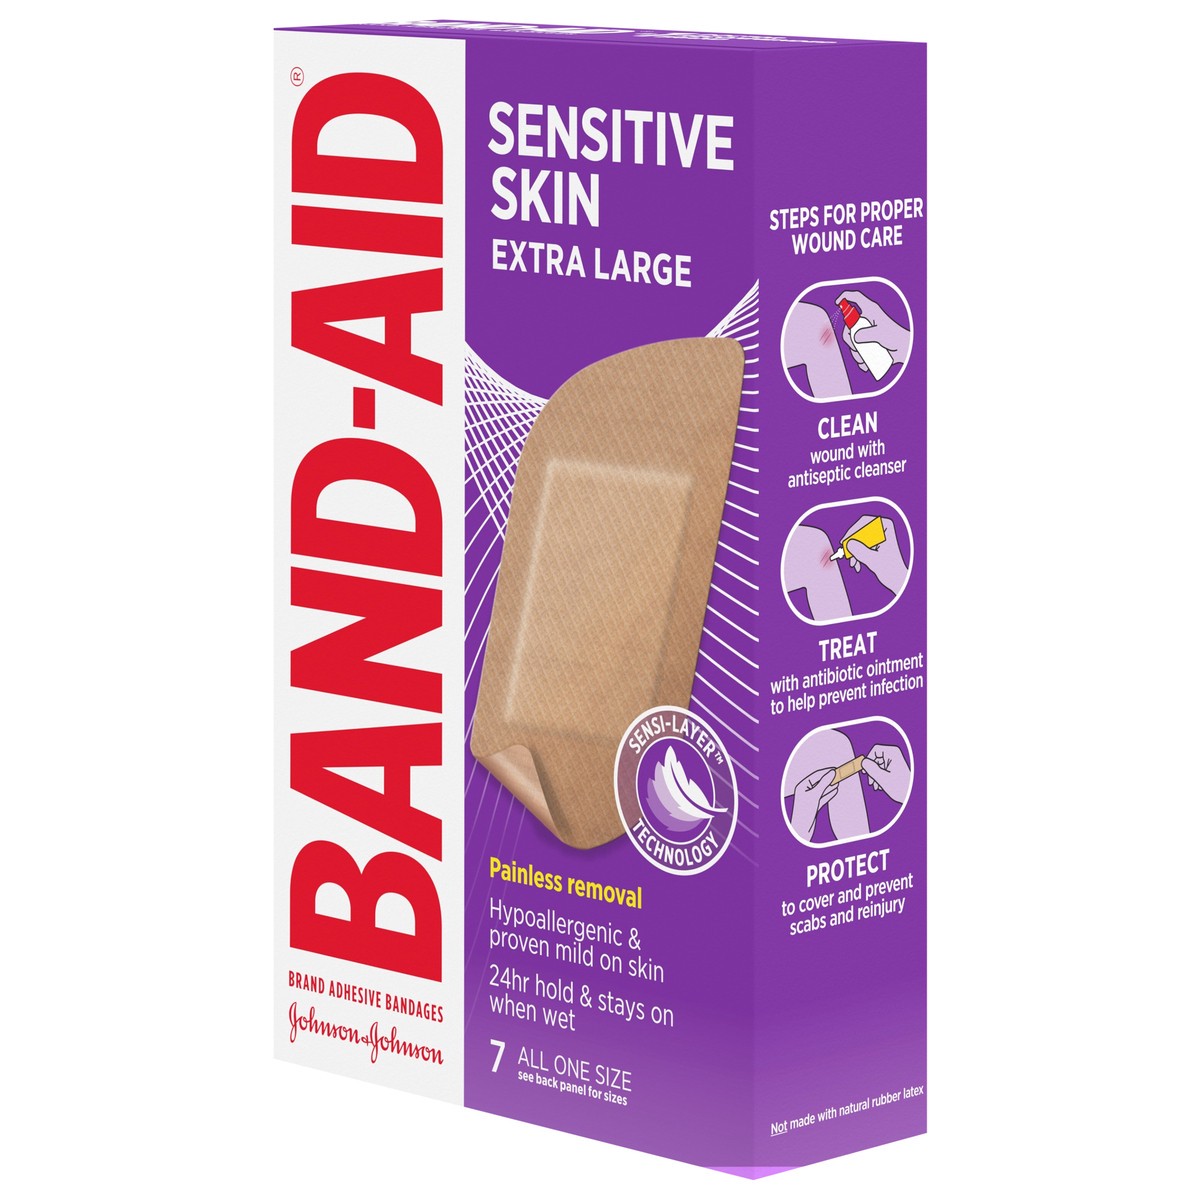 slide 3 of 8, BAND-AID Adhesive Bandages for Sensitive Skin, Hypoallergenic Bandages with Painless Removal, Stays on When Wet and Suitable for Eczema Prone Skin, Sterile, Extra Large Size, 7 ct, 7 ct